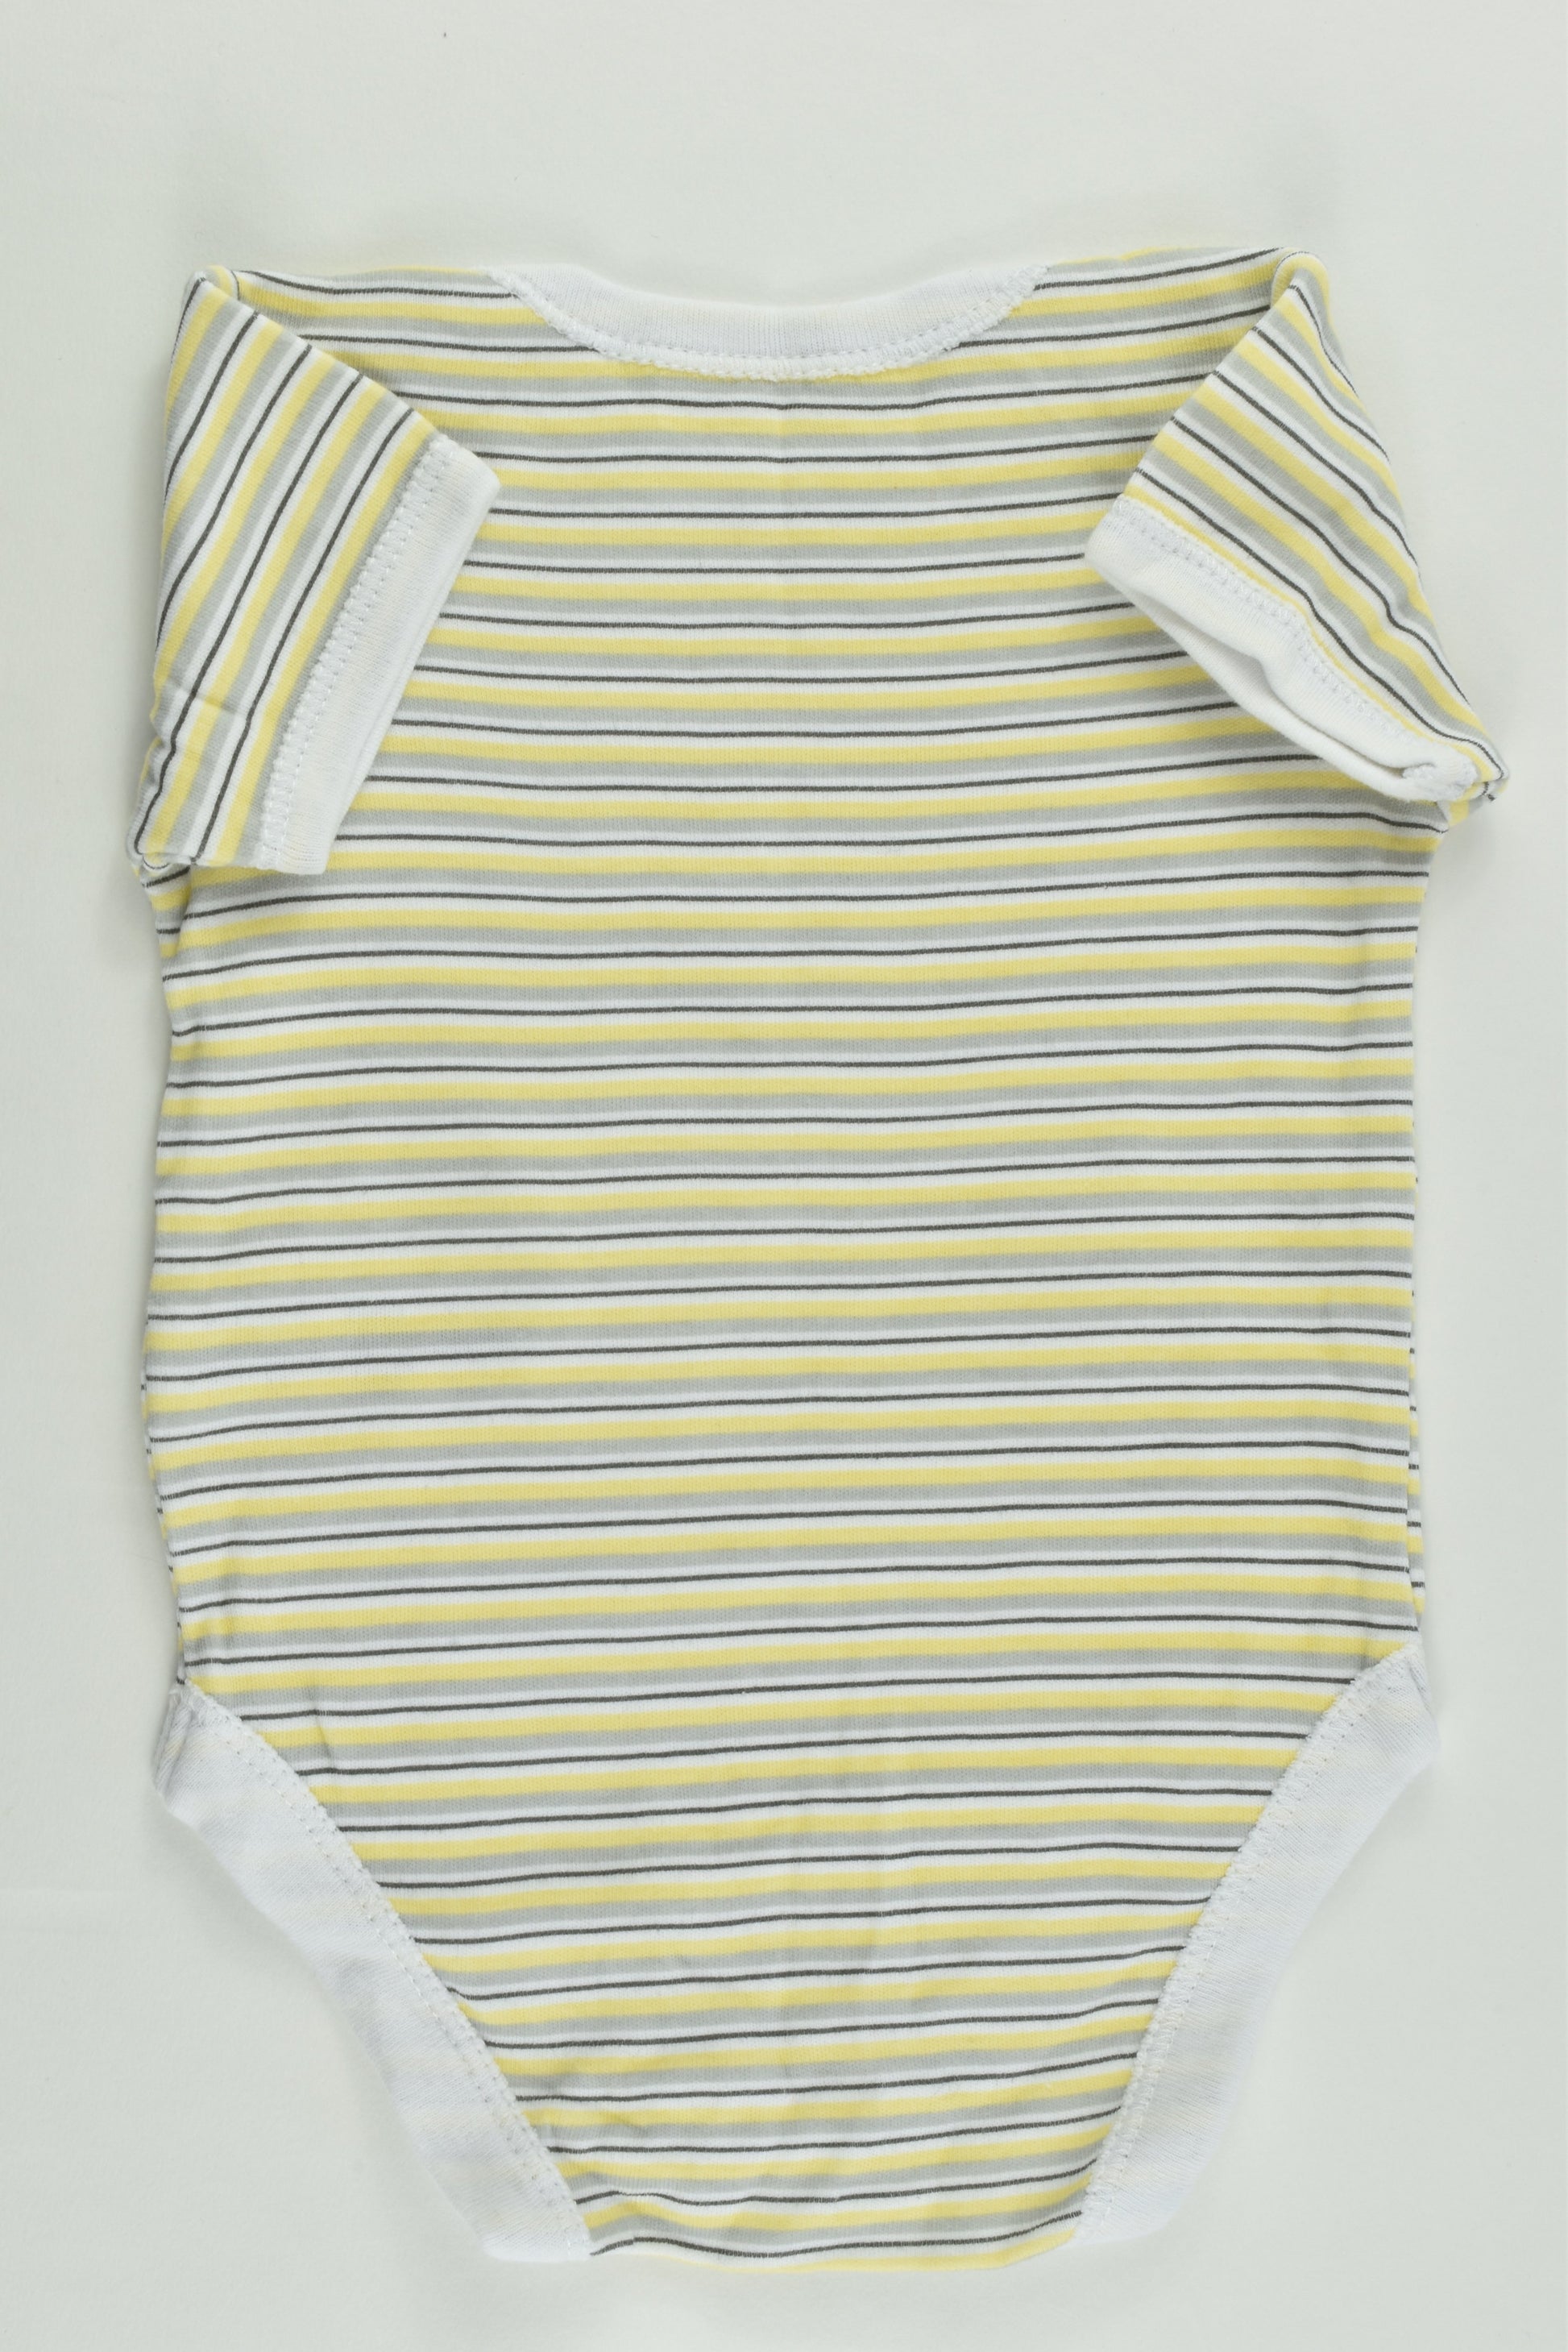 Early Days Size 000 (0-3 months) Striped Bodysuit